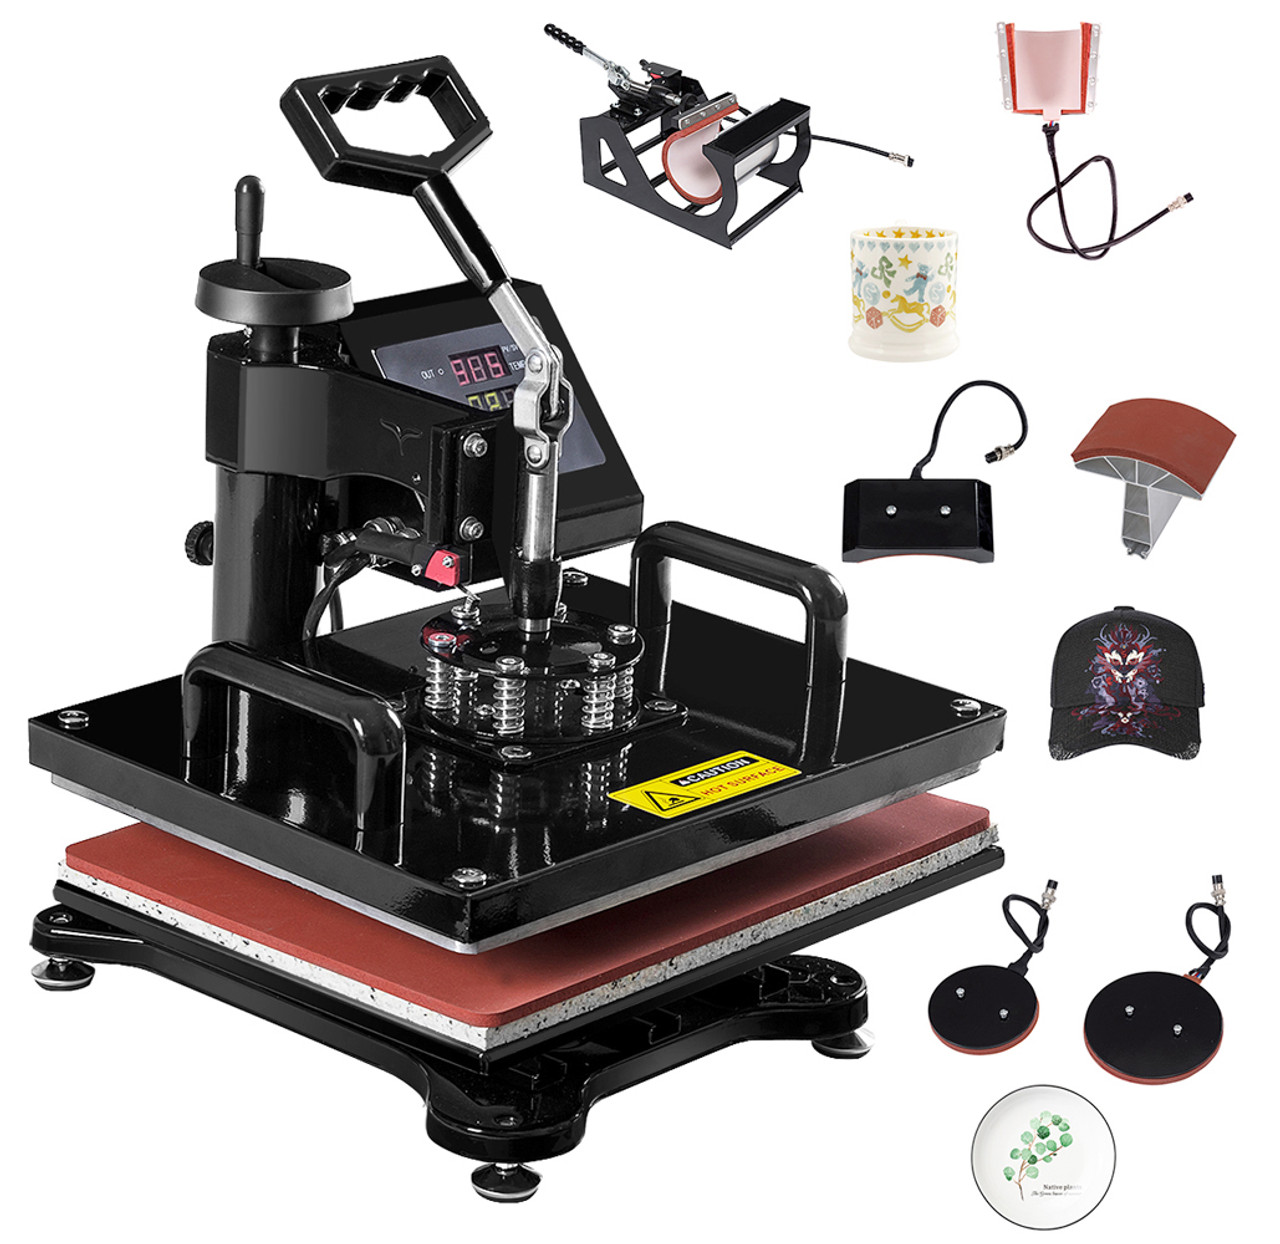 Digital 6-in-1 Heat Press Transfer Sublimation Machine for Shirts, Hats & More product image